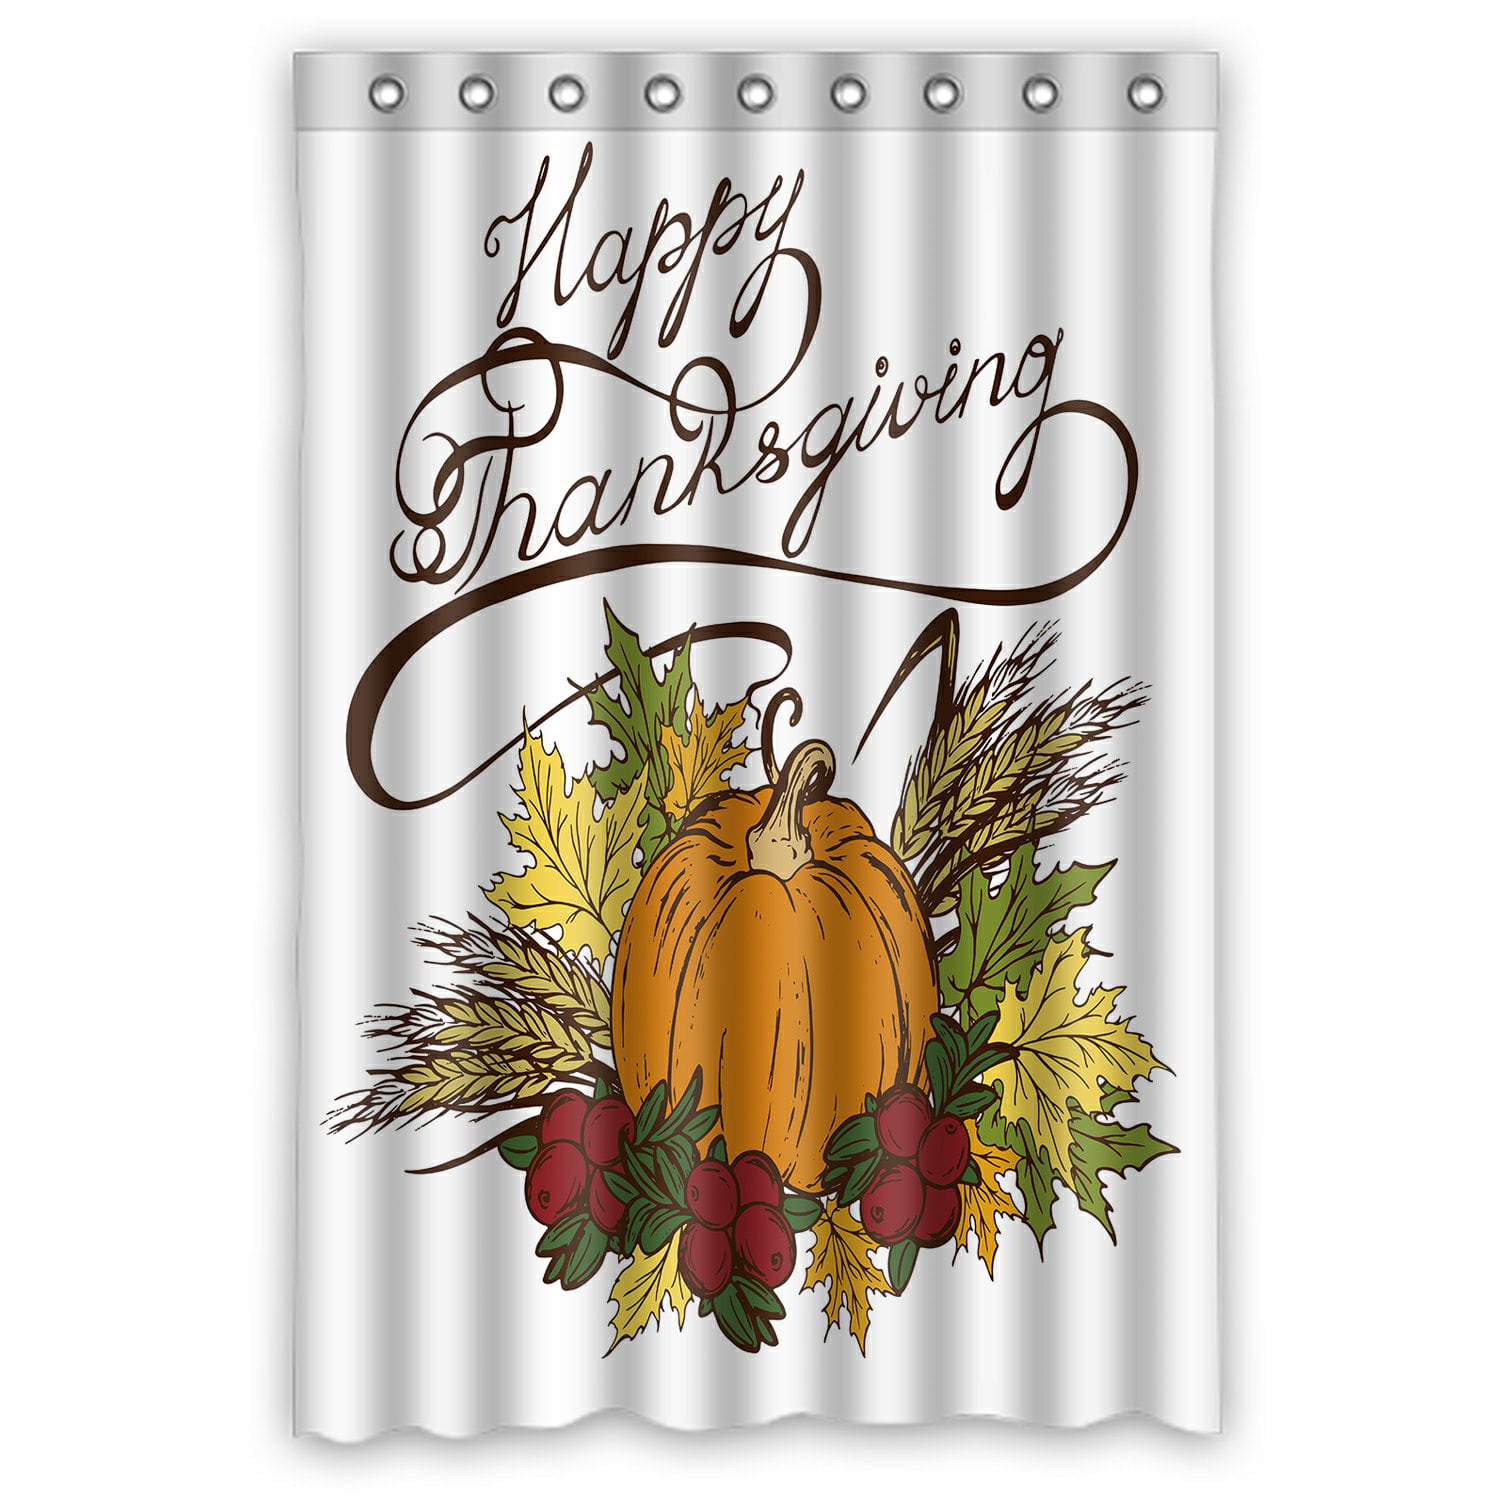 Harvest Festival Happy Thanksgiving Day Shower Curtain Liner Waterproof Fabric 